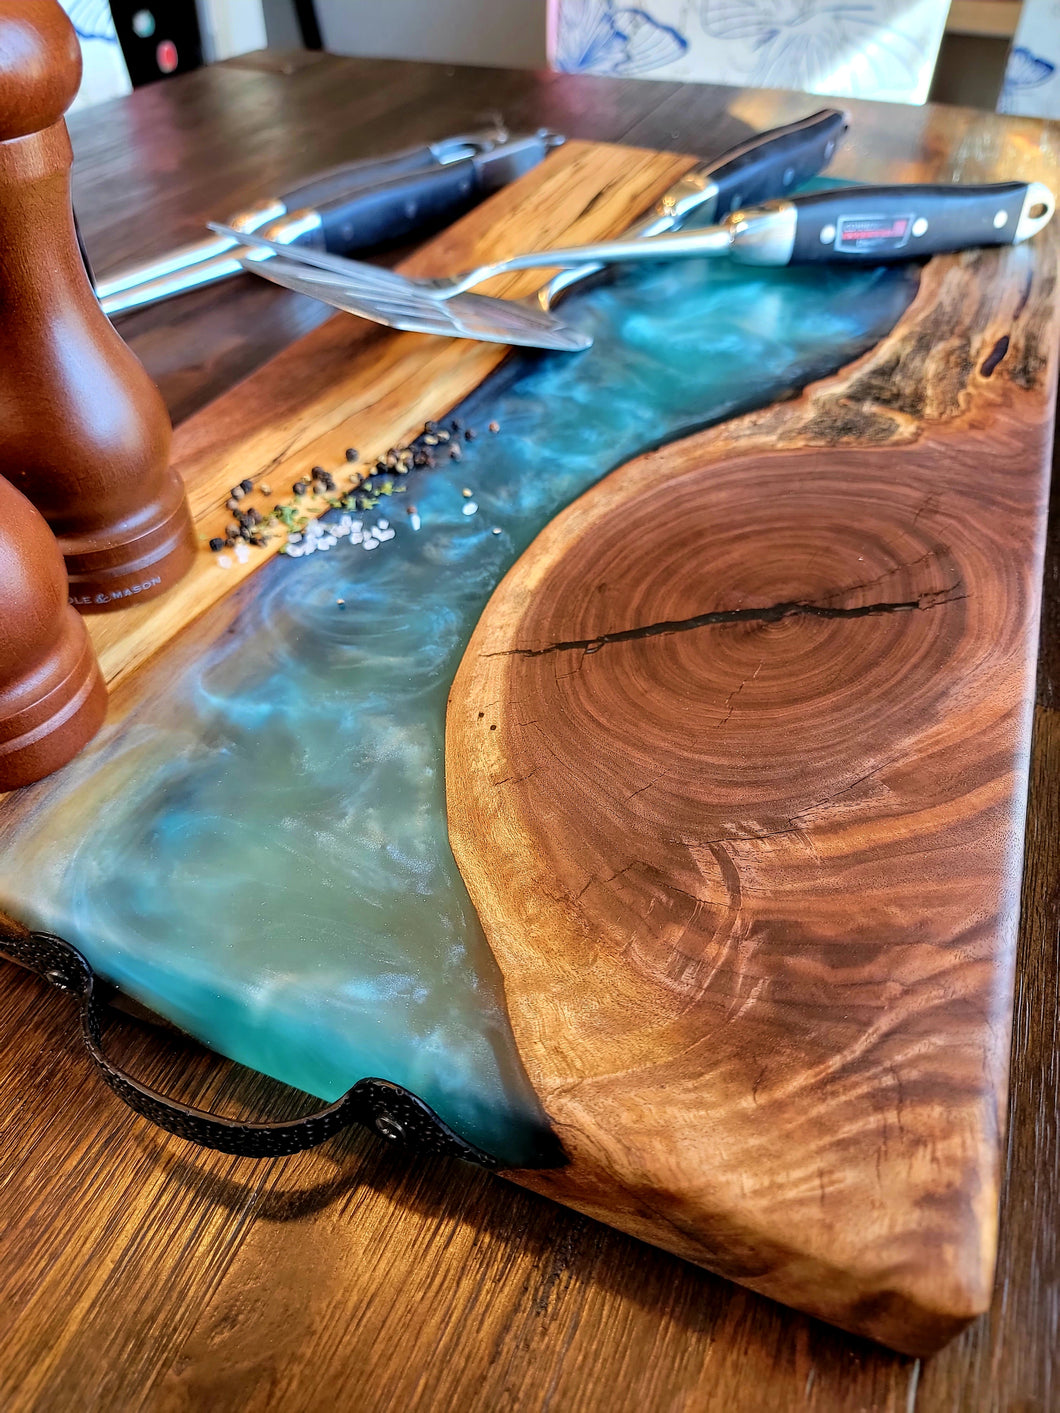 I made this wooden epoxy cutting board out of the offcuts, I used